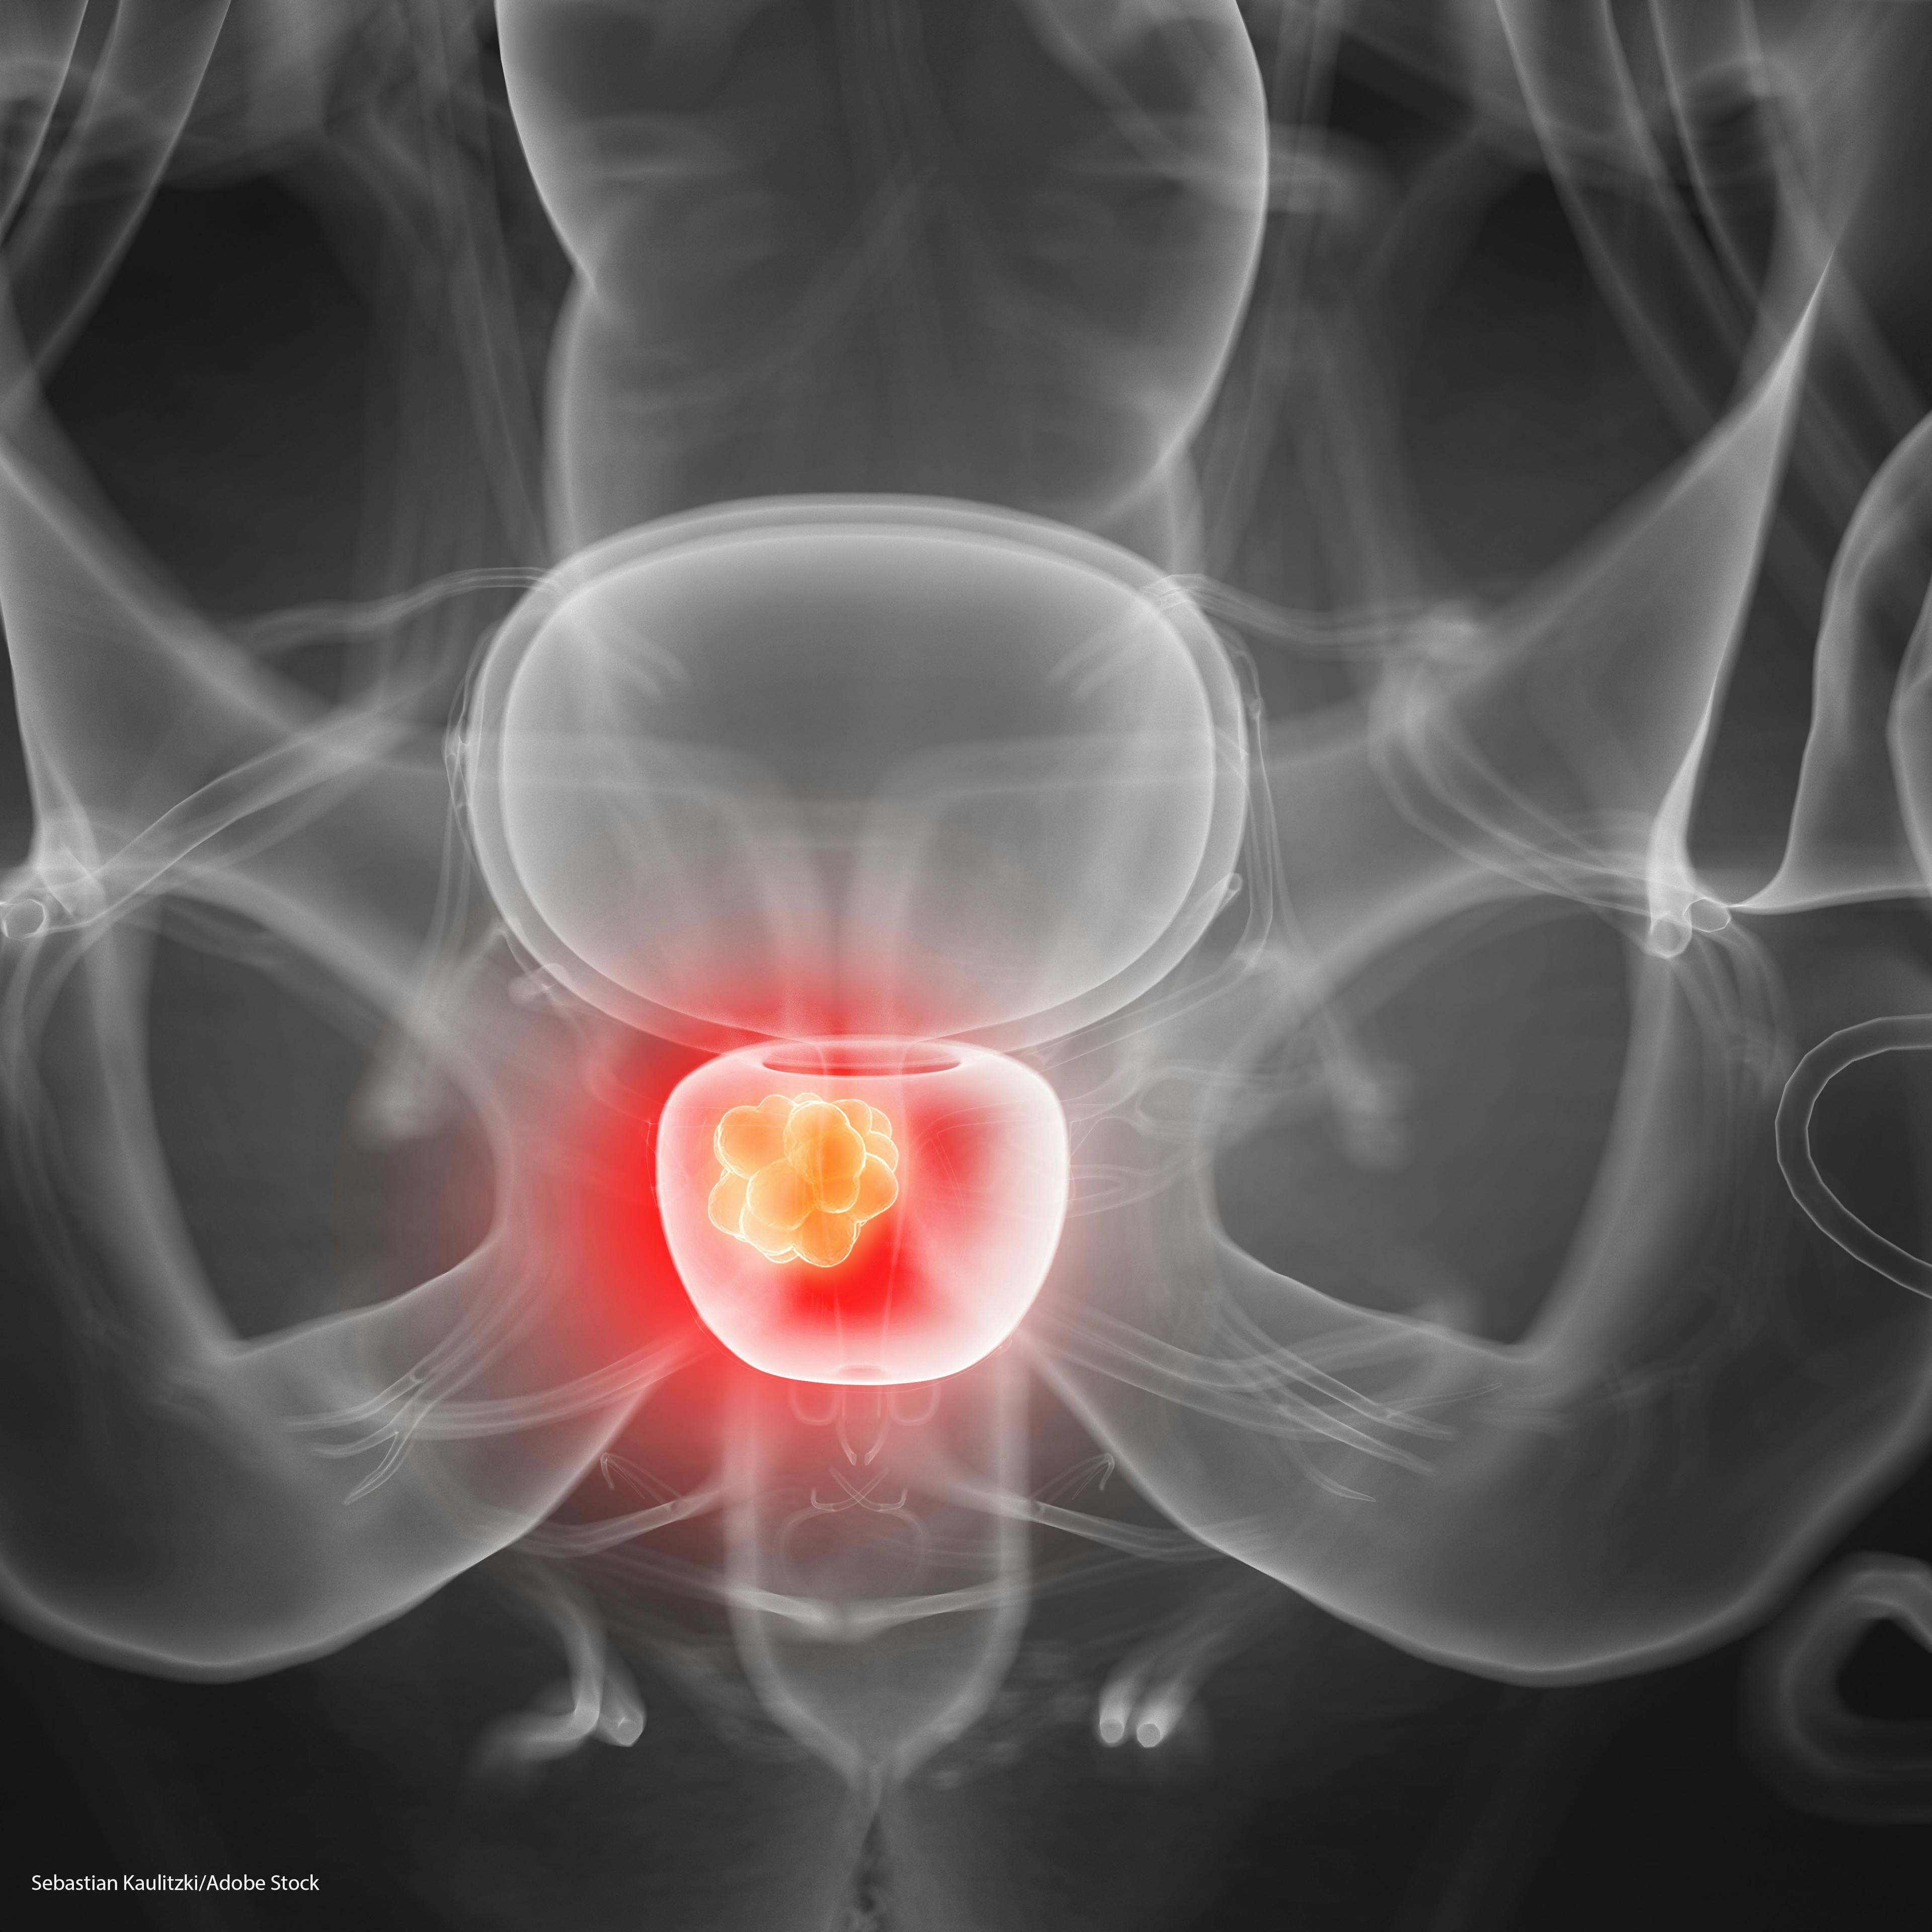 Radiation Treatment May Slow Disease Progression for Patients with Prostate Cancer